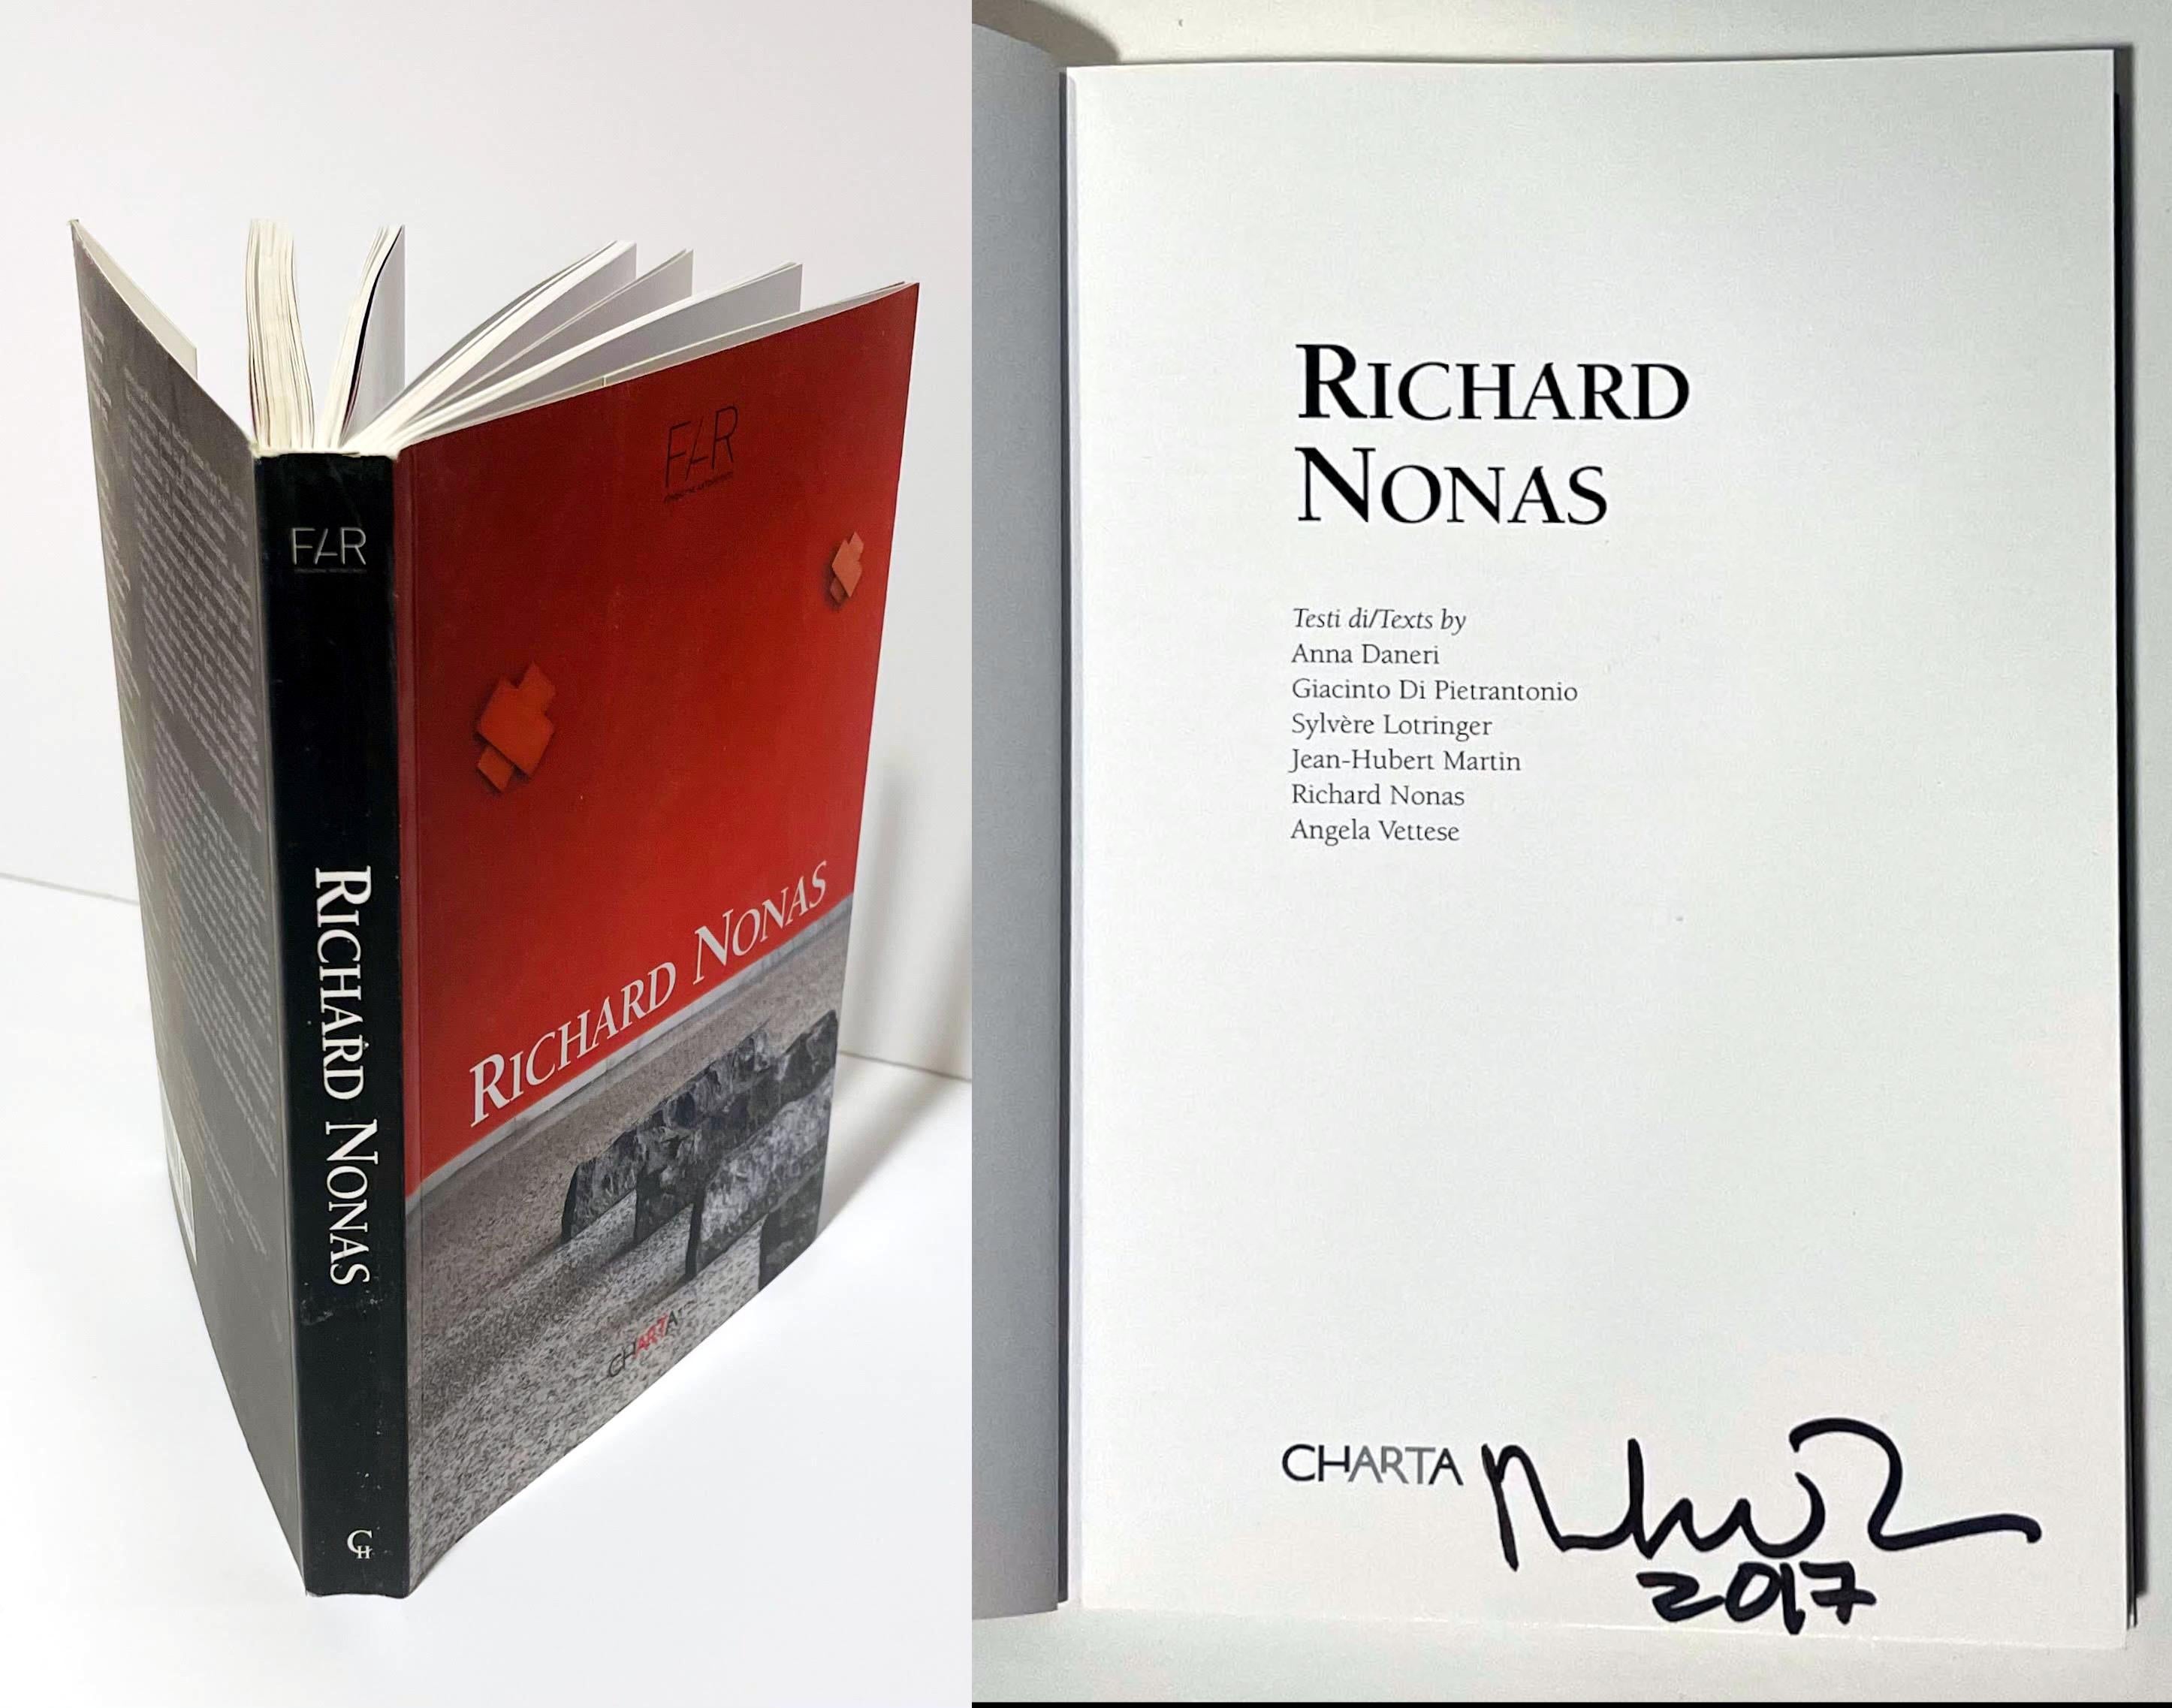 Richard Nonas (hand signed by Richard Nonas), 2004
Softcover monograph (hand signed by Richard Nonas)
Hand signed by Richard Nonas for the present owner on the title page
8 × 6 × 1 inches

Provenance:
hand signed by Richard Nonas for the present